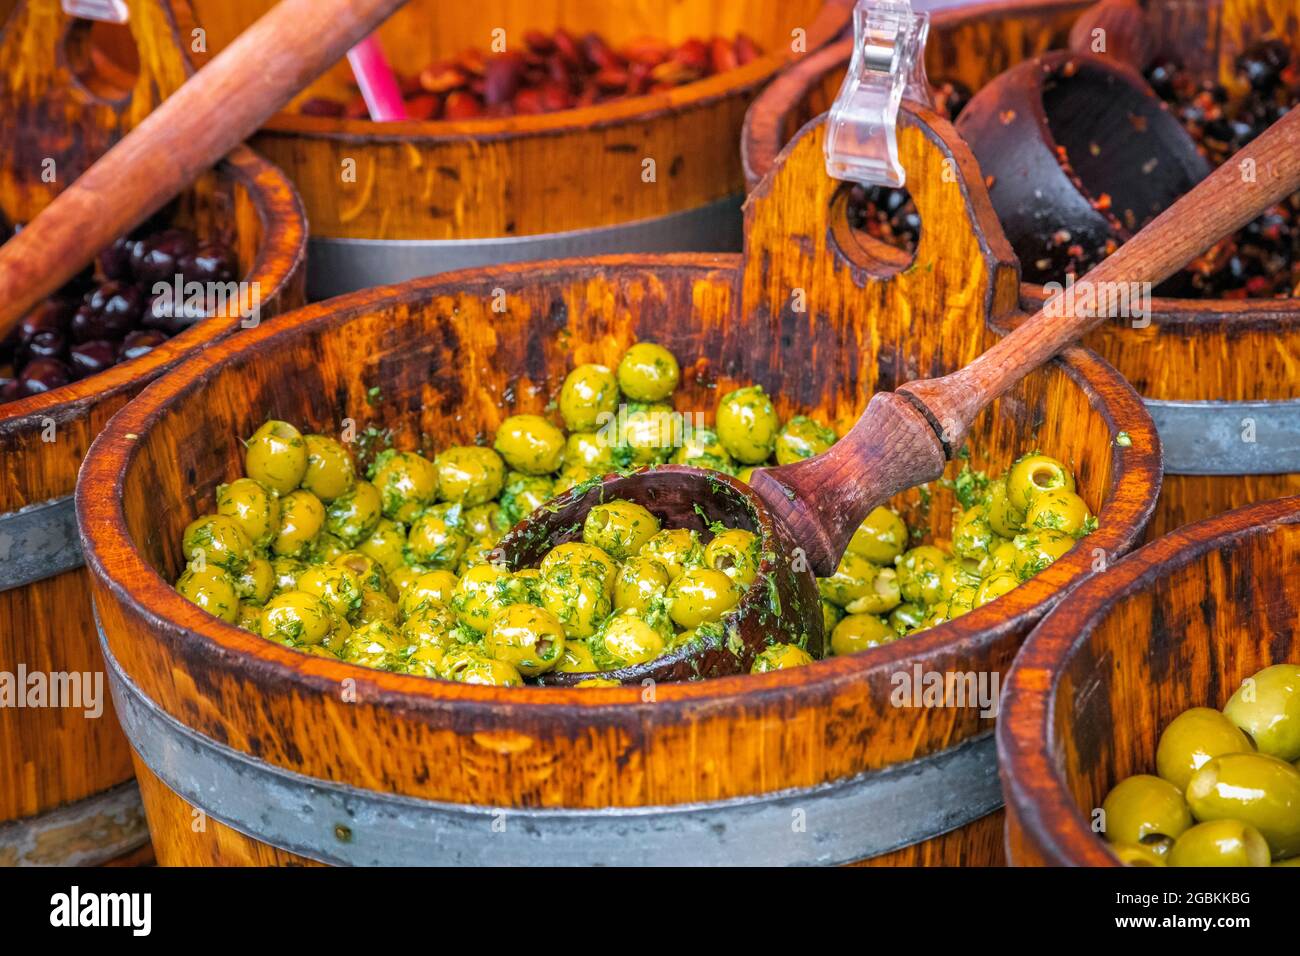 Assortment of marinated olives on display at Broadway market, a street market in Hackney, East London Stock Photo